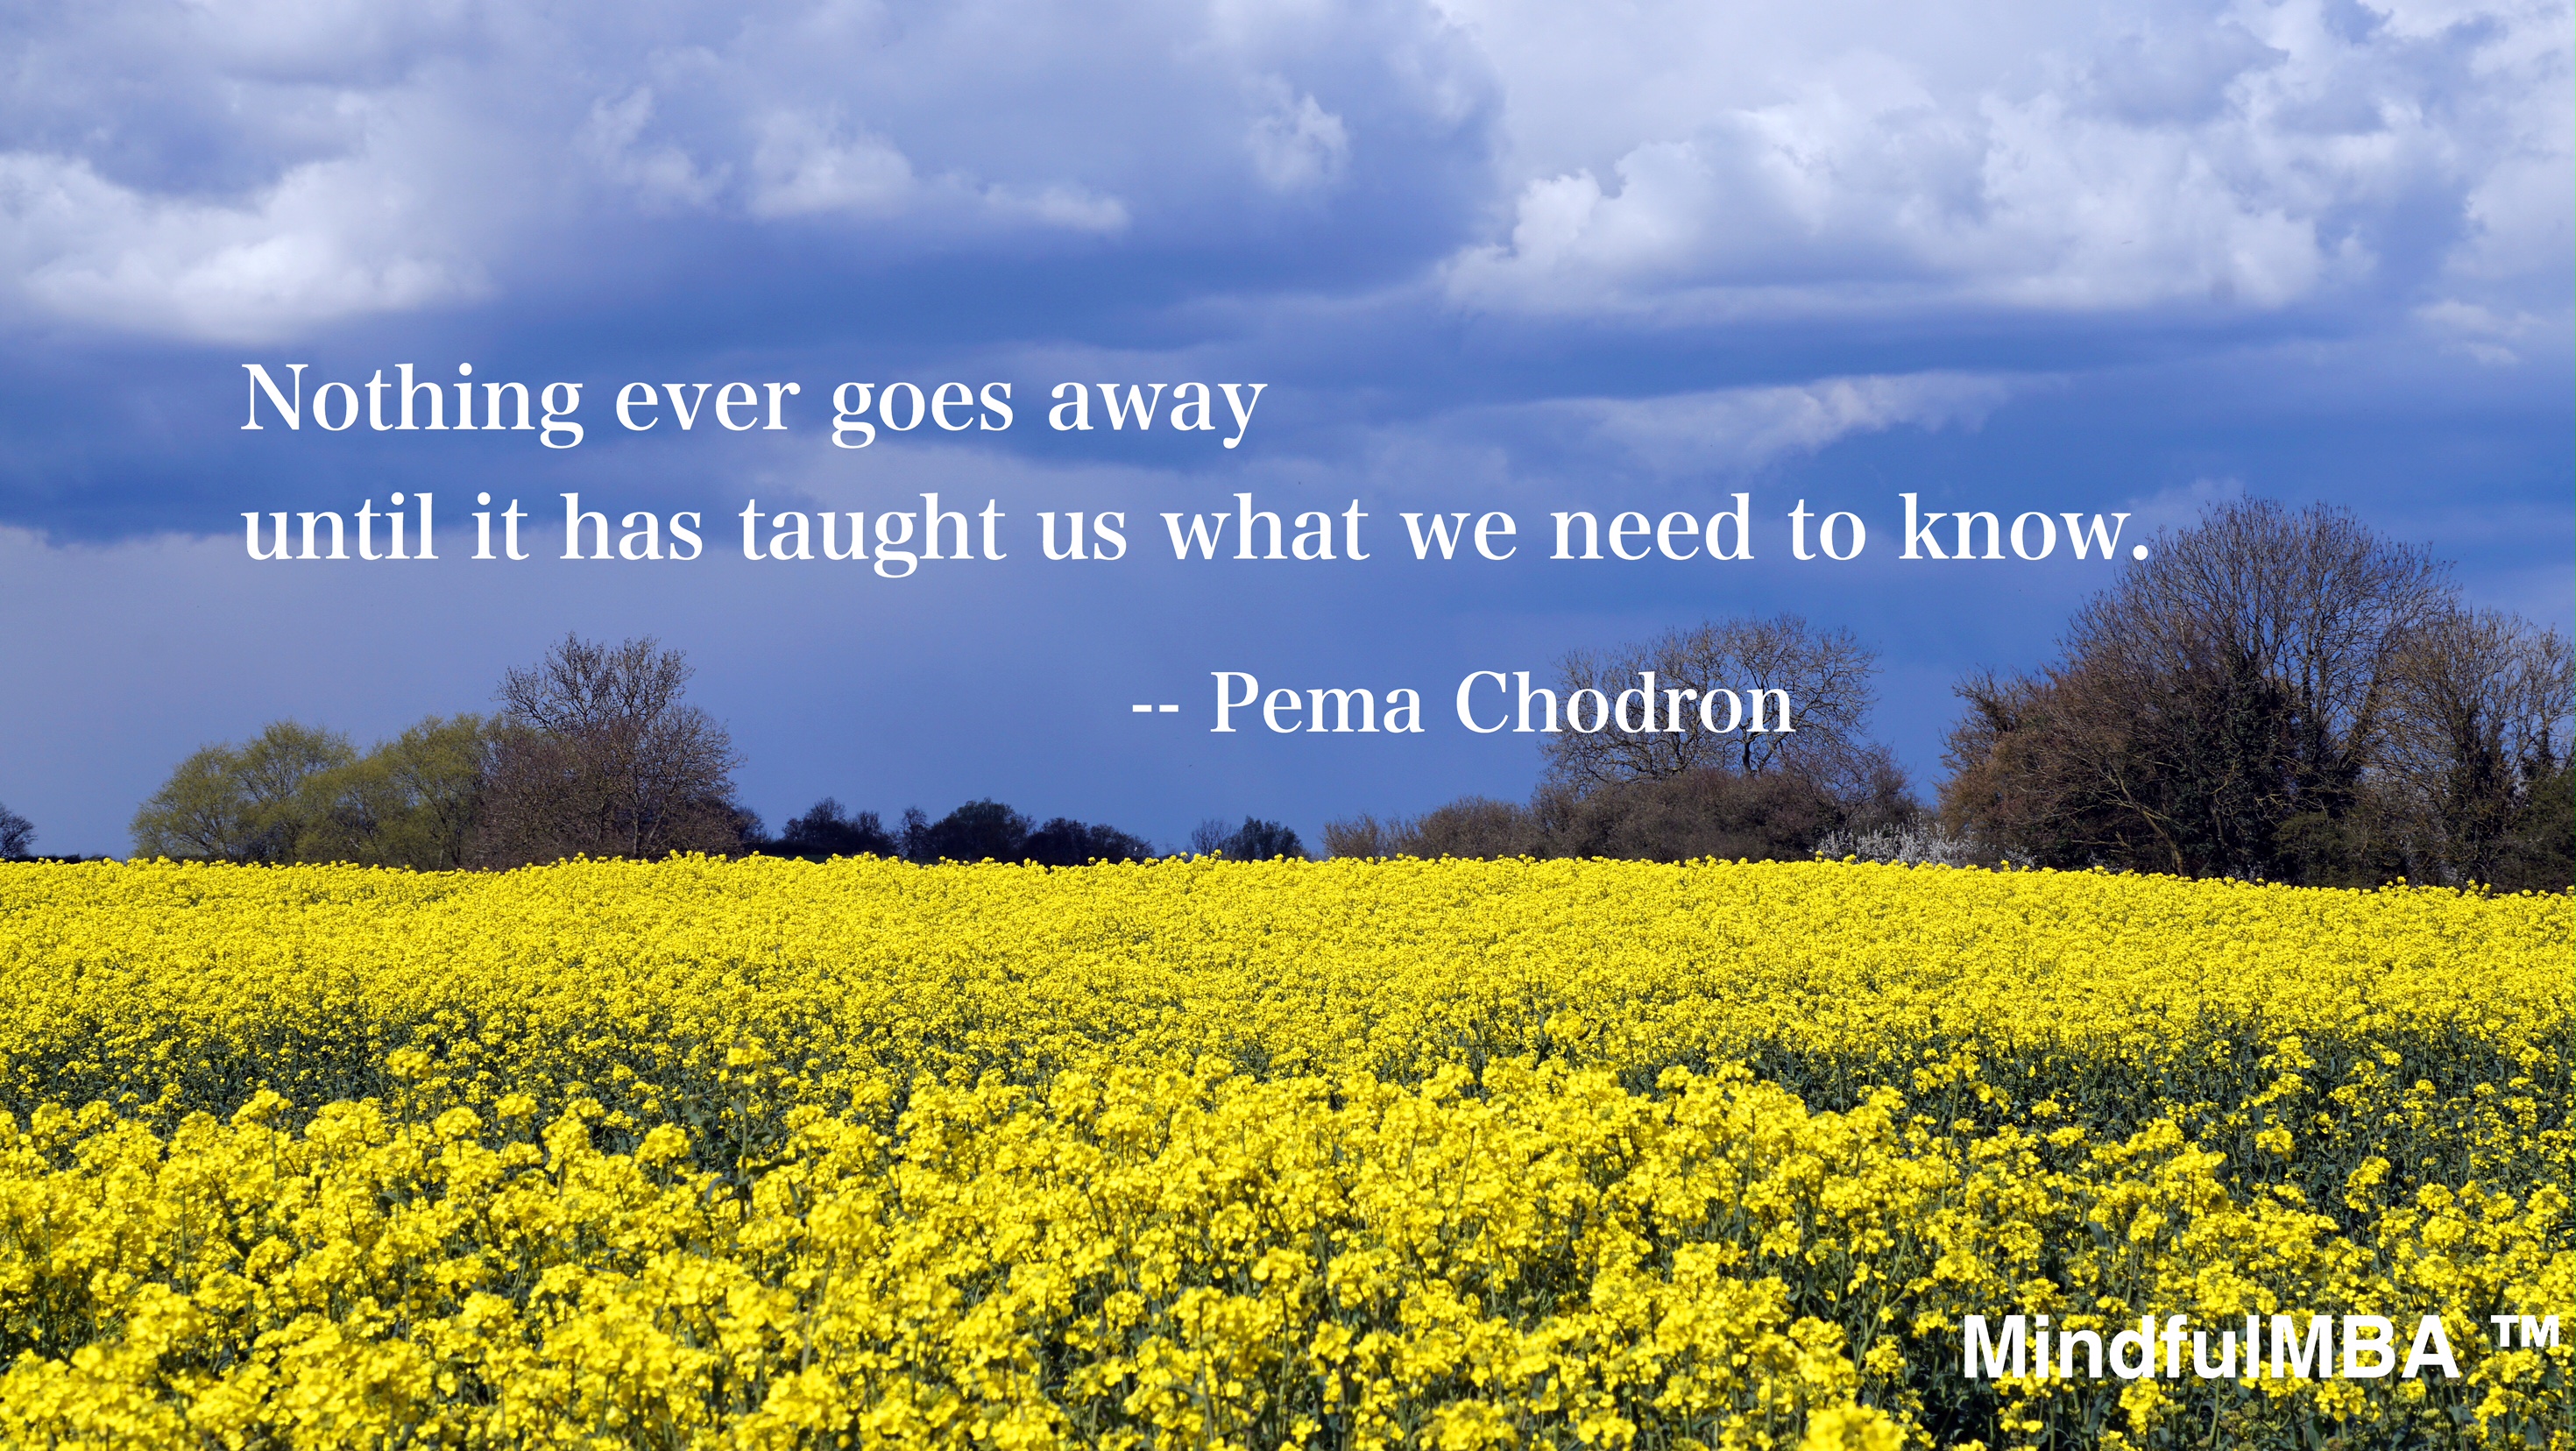 Pema Chodron_Nothing Ever Goes Away quote w tag